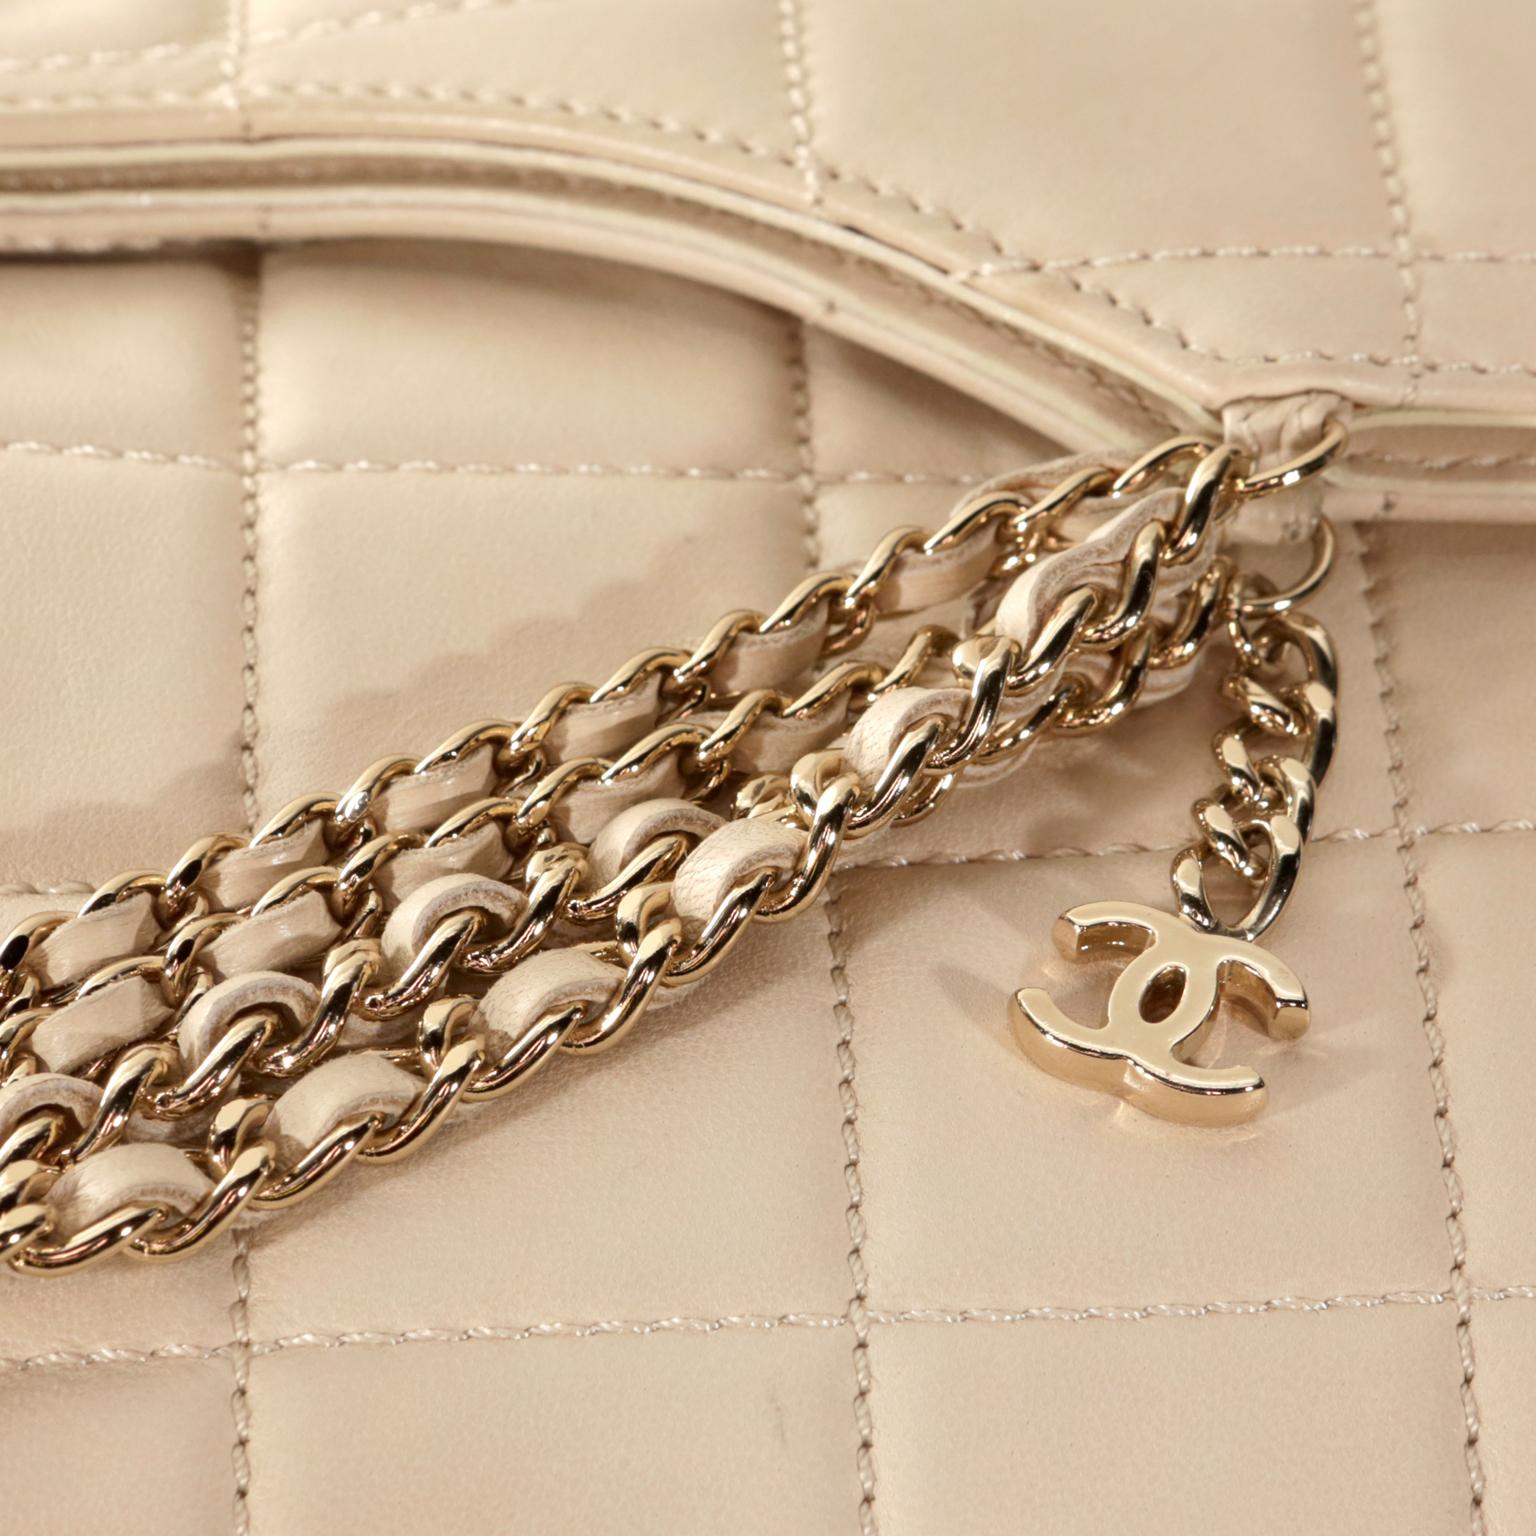 Chanel Beige Leather Multi Chain Convertible Envelope Clutch 2